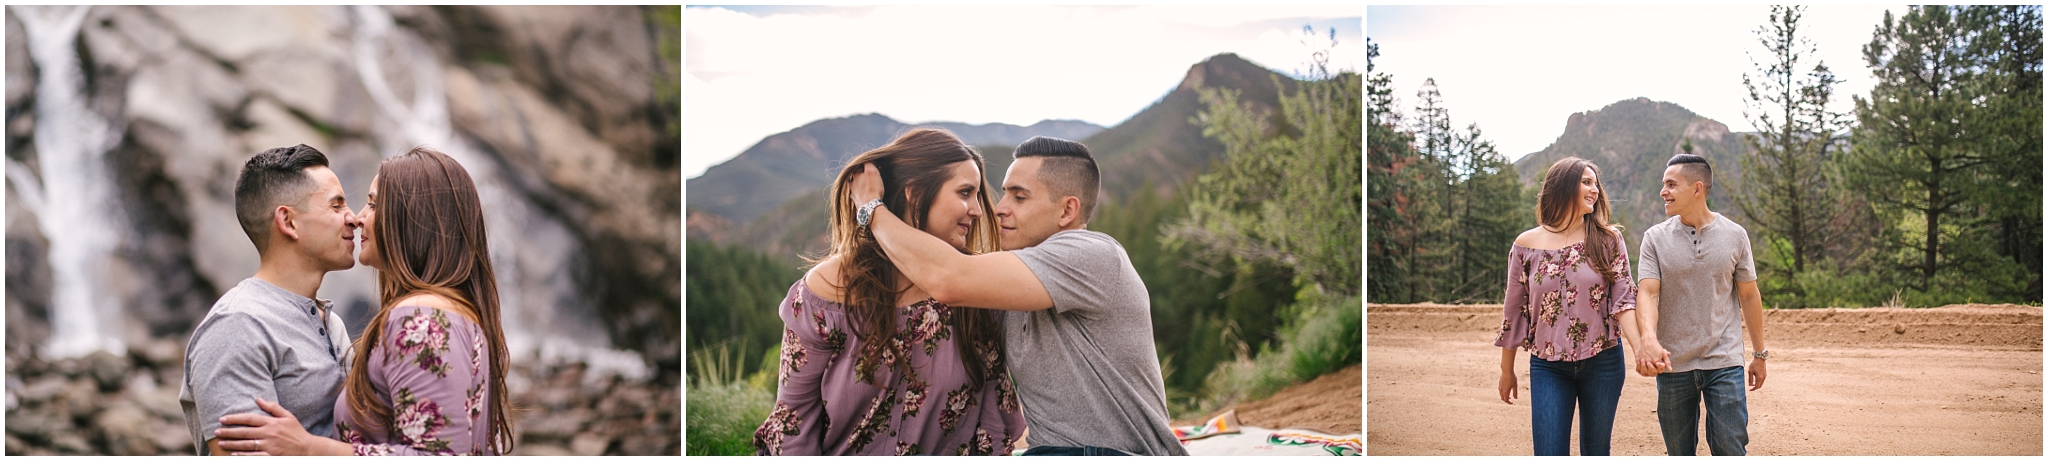 North Cheyenne Canon Park - Favorite Colorado Mountain Locations for Adventurous Engagement Pictures